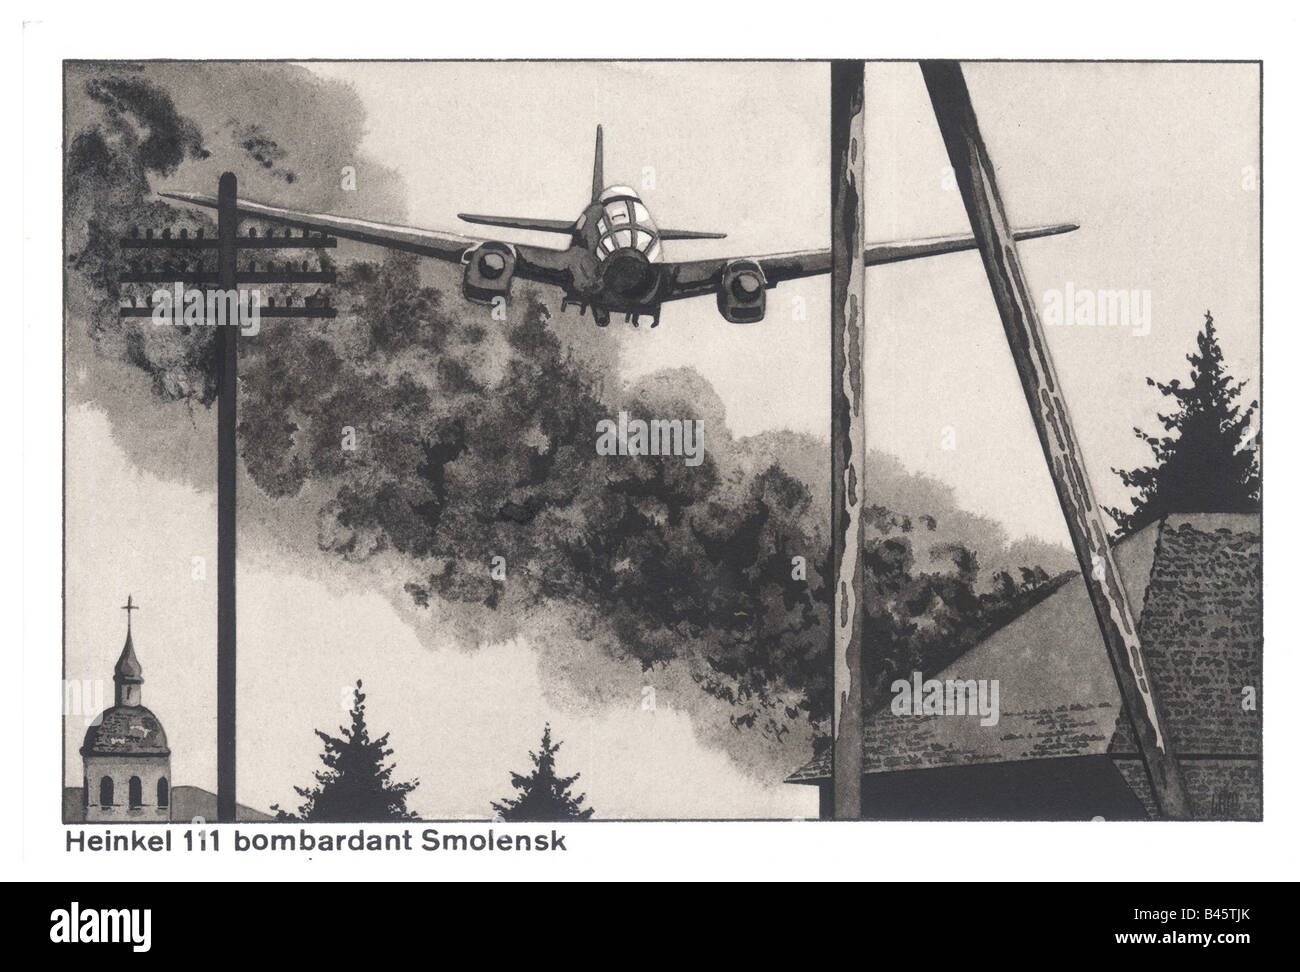 events, Second World War/WWII, aerial warfare, Russia 1941, German Bomber Heinkel He 111 bombing Smolensk, drawing by LEM, 20th century, , Stock Photo